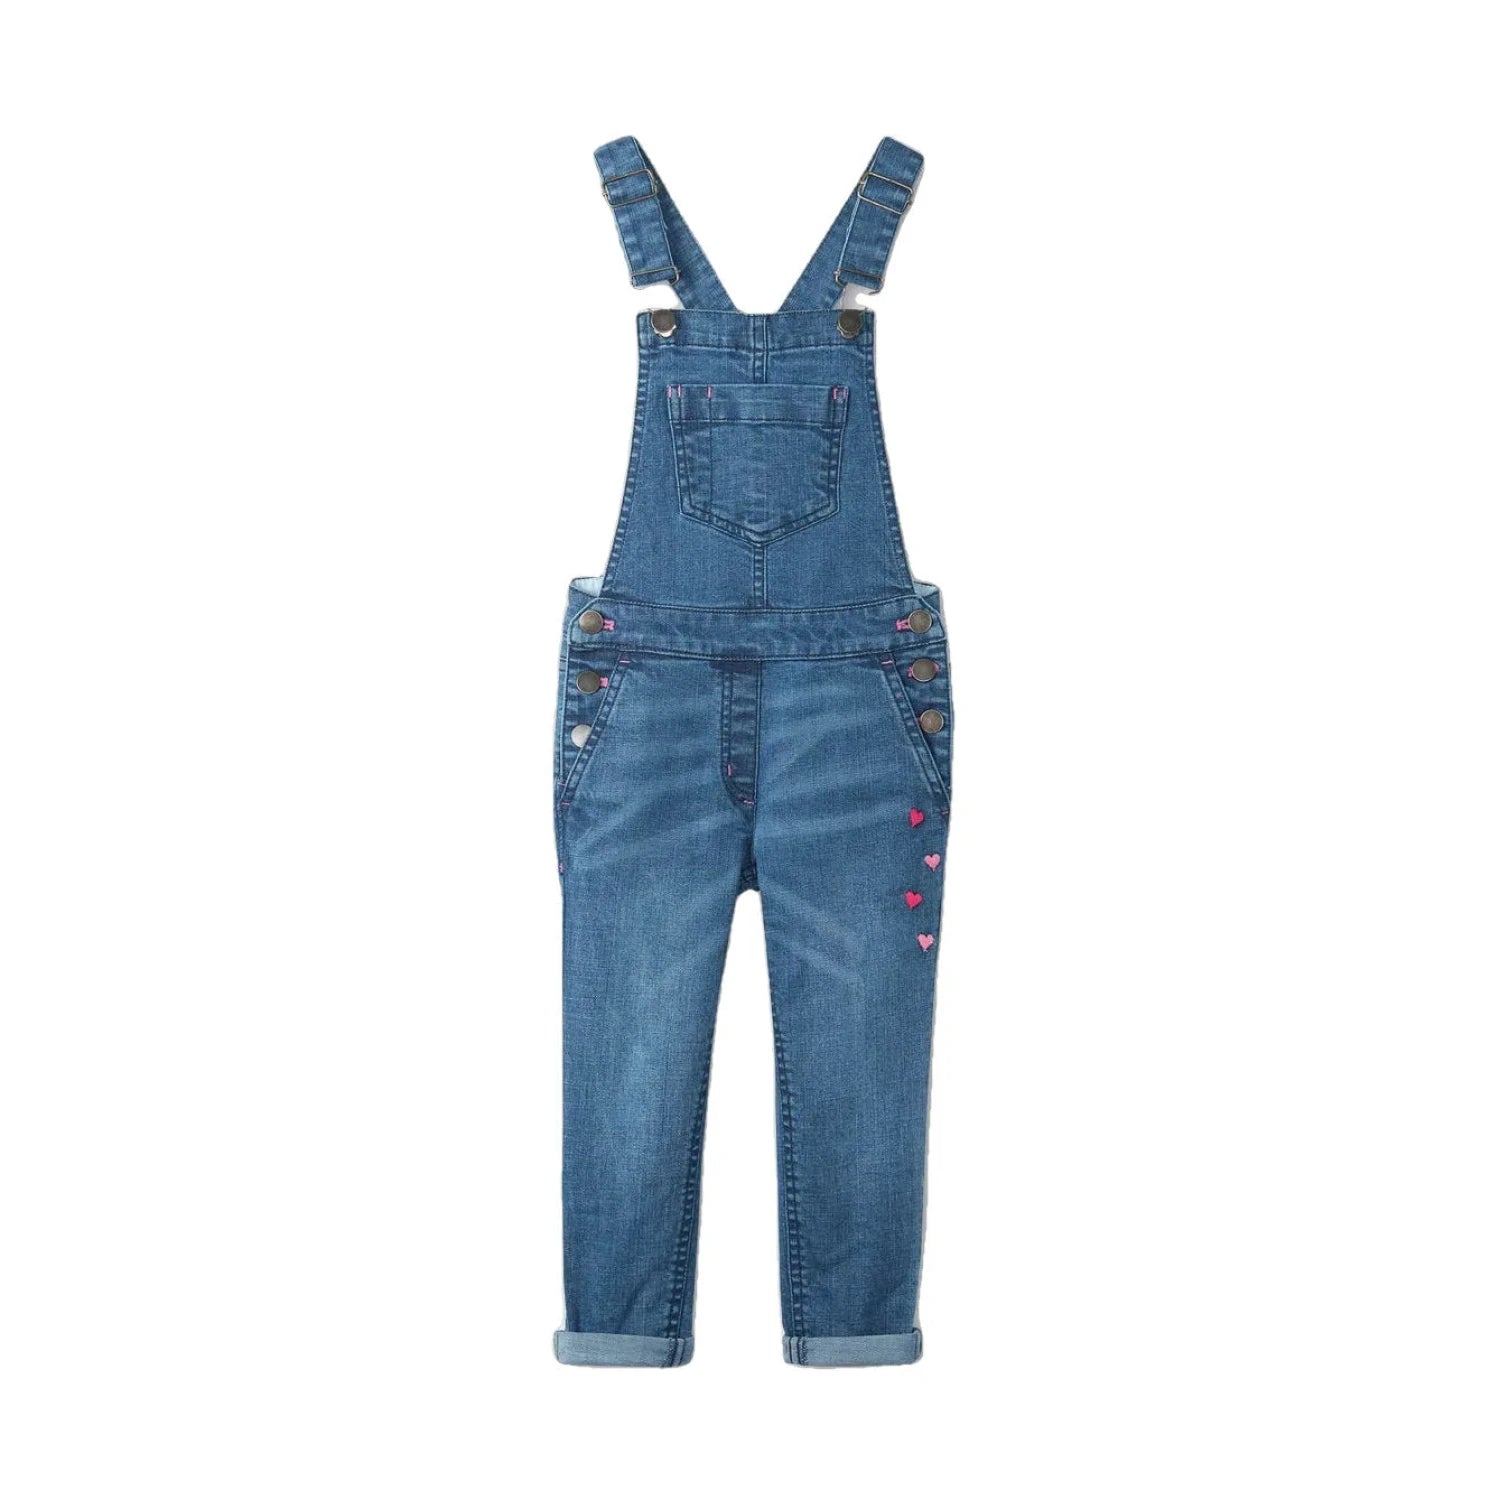 Hatley Girls Denim Stretch Classic Overalls, deep blue, front view. Pink hearts on left thigh.